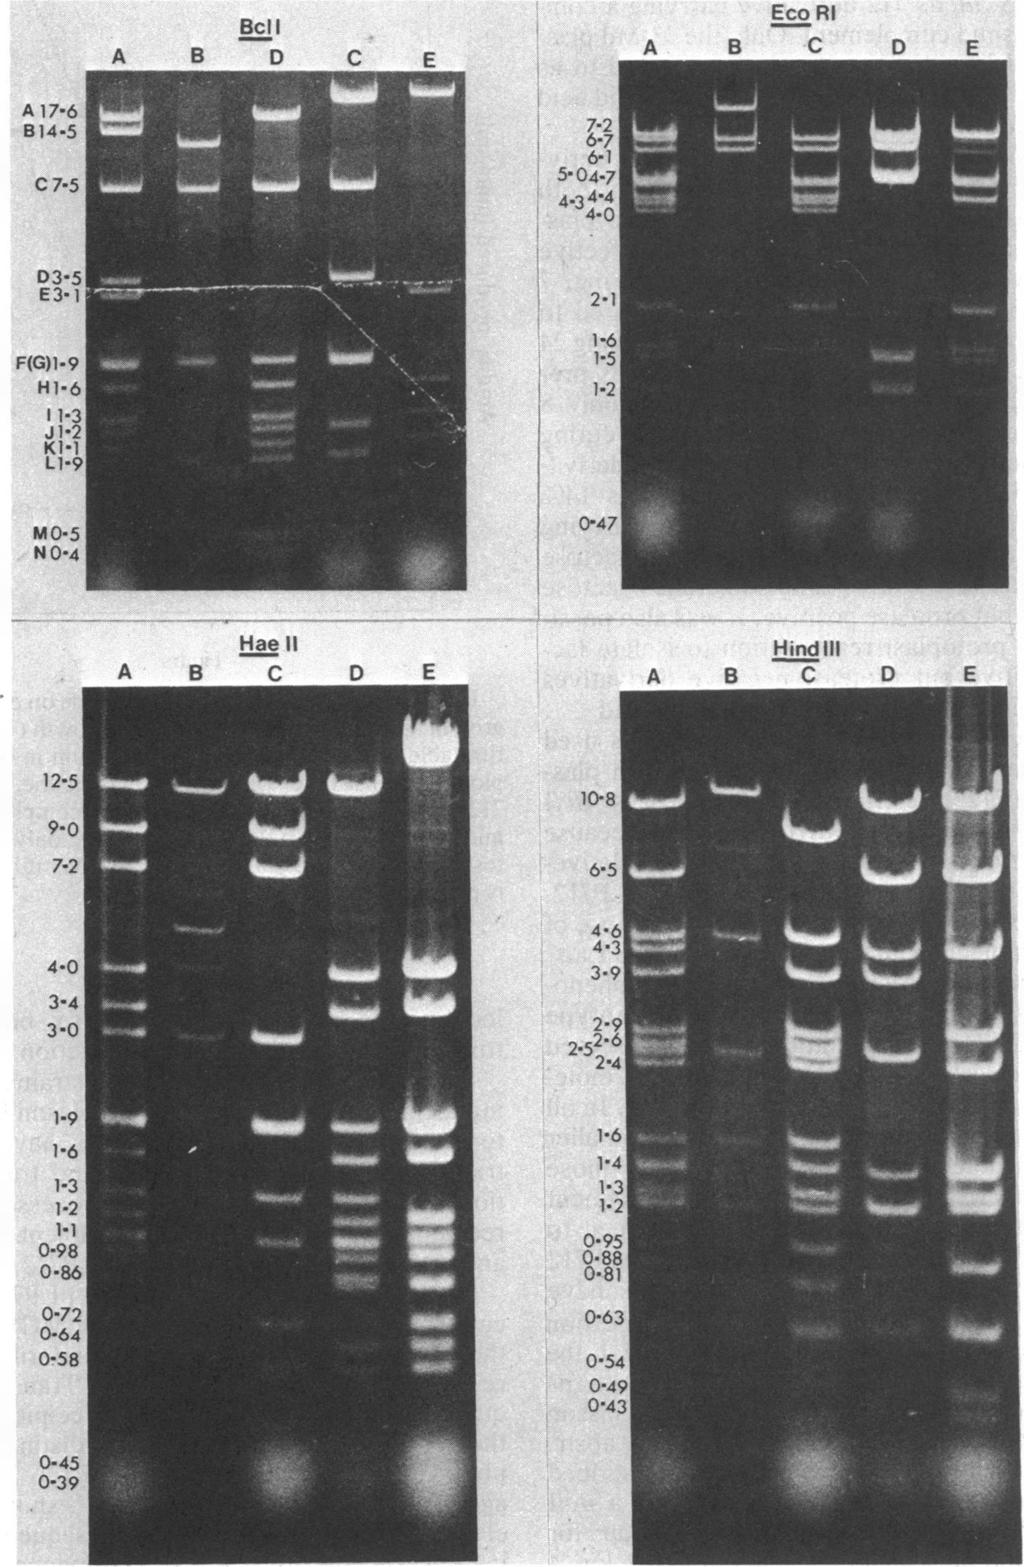 6 GASSON J. BACTERIOL. BclI r% Eco RI A B C D E 7-2 6-7 6-1 5-04-7 4.34-4 4-0 Hae 11 A A r, n 2-1 1-6 1-5 1-2 0-47 Hind ill A el r Downloaded from http://jb.asm.